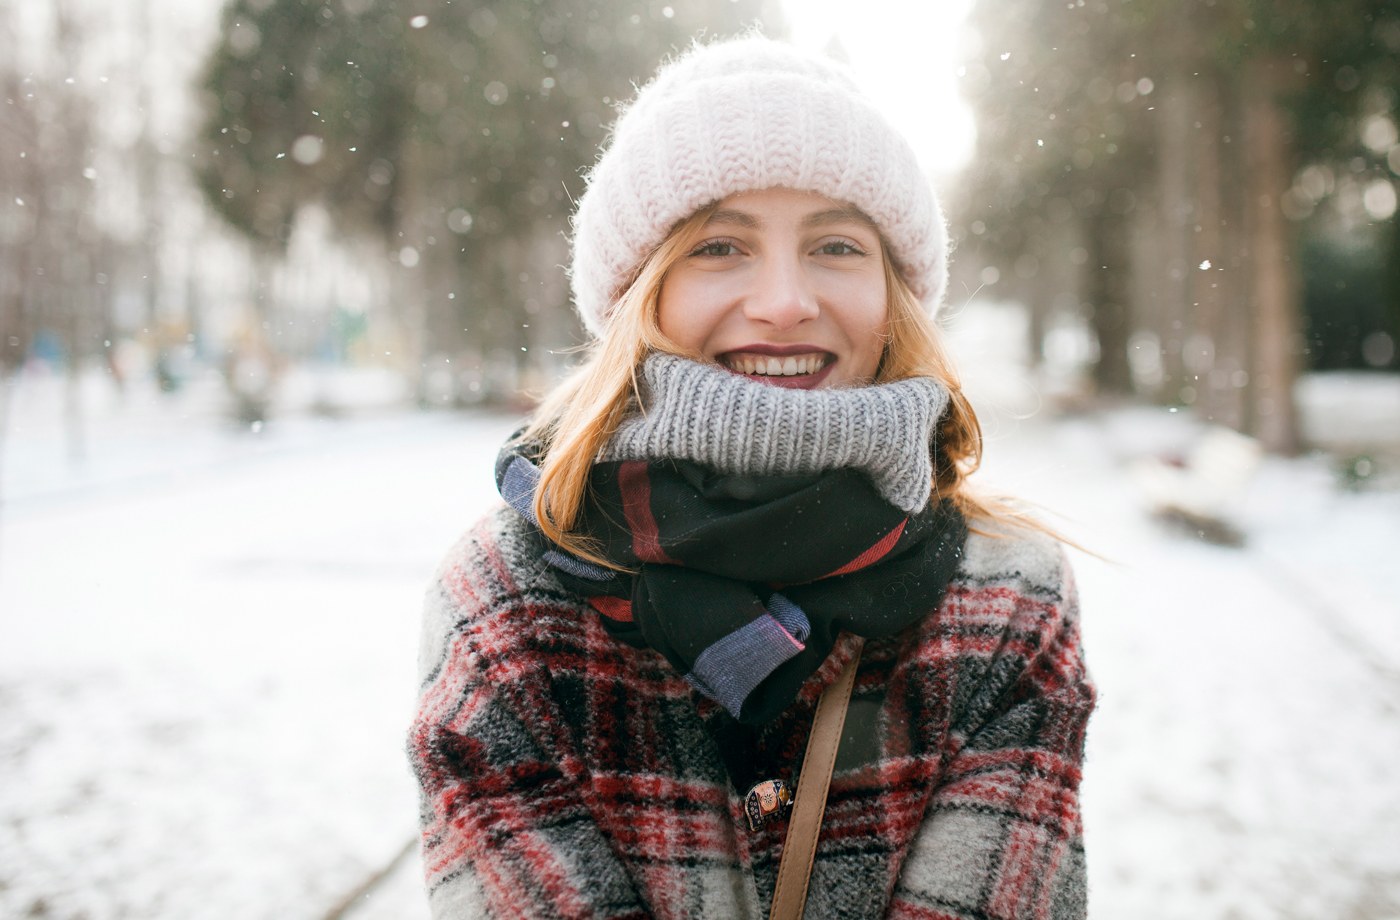 How to wash your winter scarf, hat, and other accessories